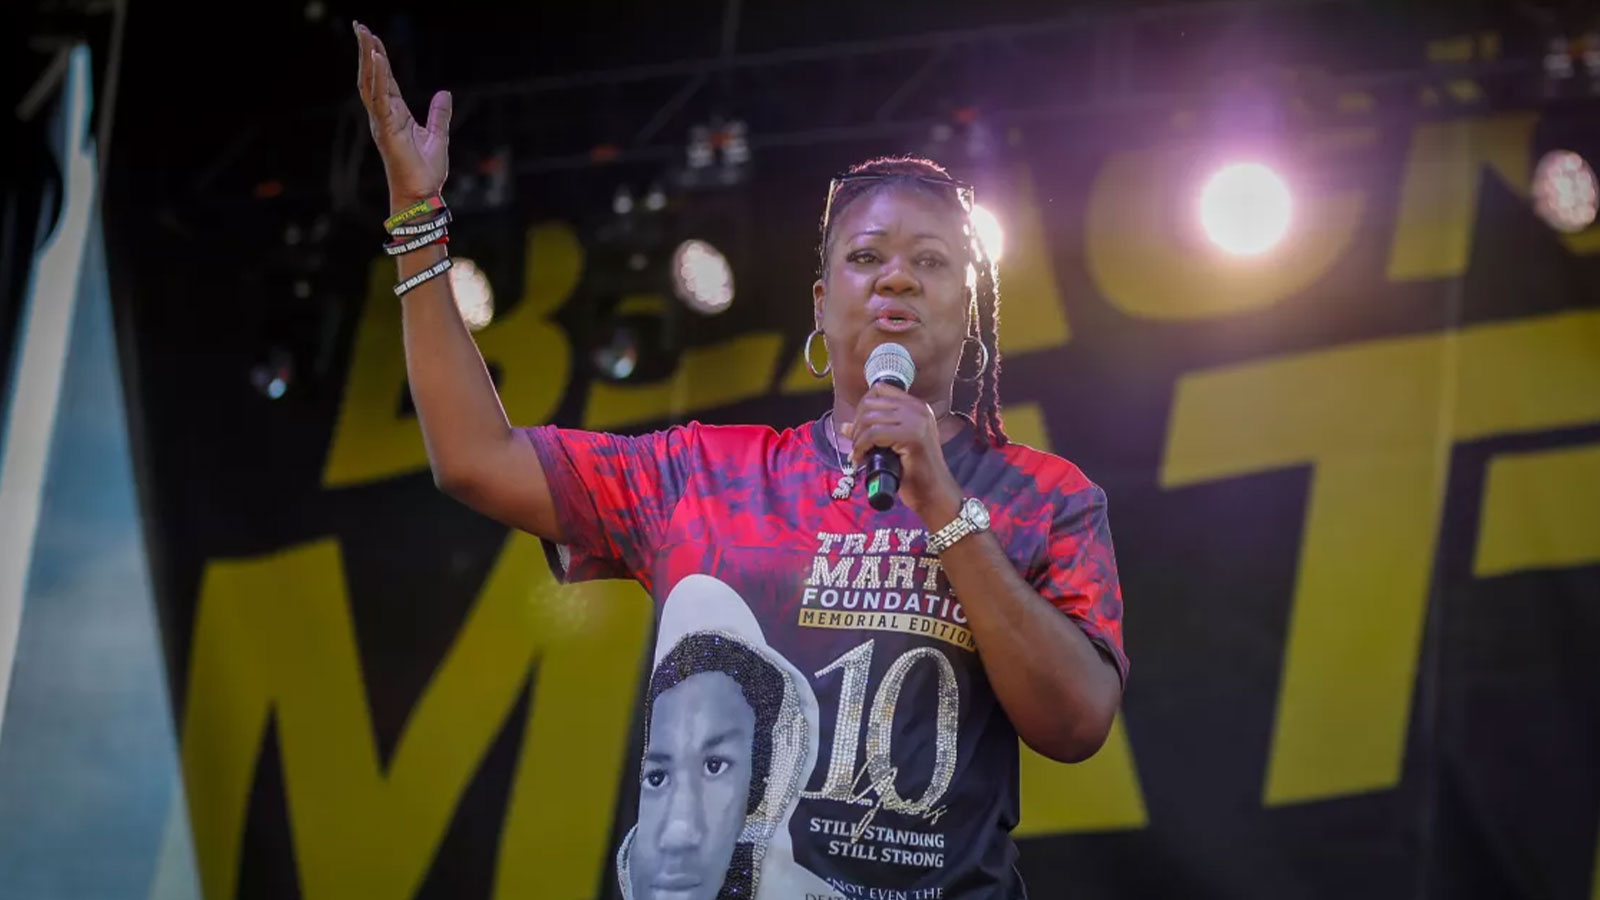 Sybrina Fulton, mother of Trayvon Martin — who was racially profiled and killed a decade ago in Florida — speaks at the 10th anniversary Black Lives Matter Festival in L.A.’s Leimert Park.